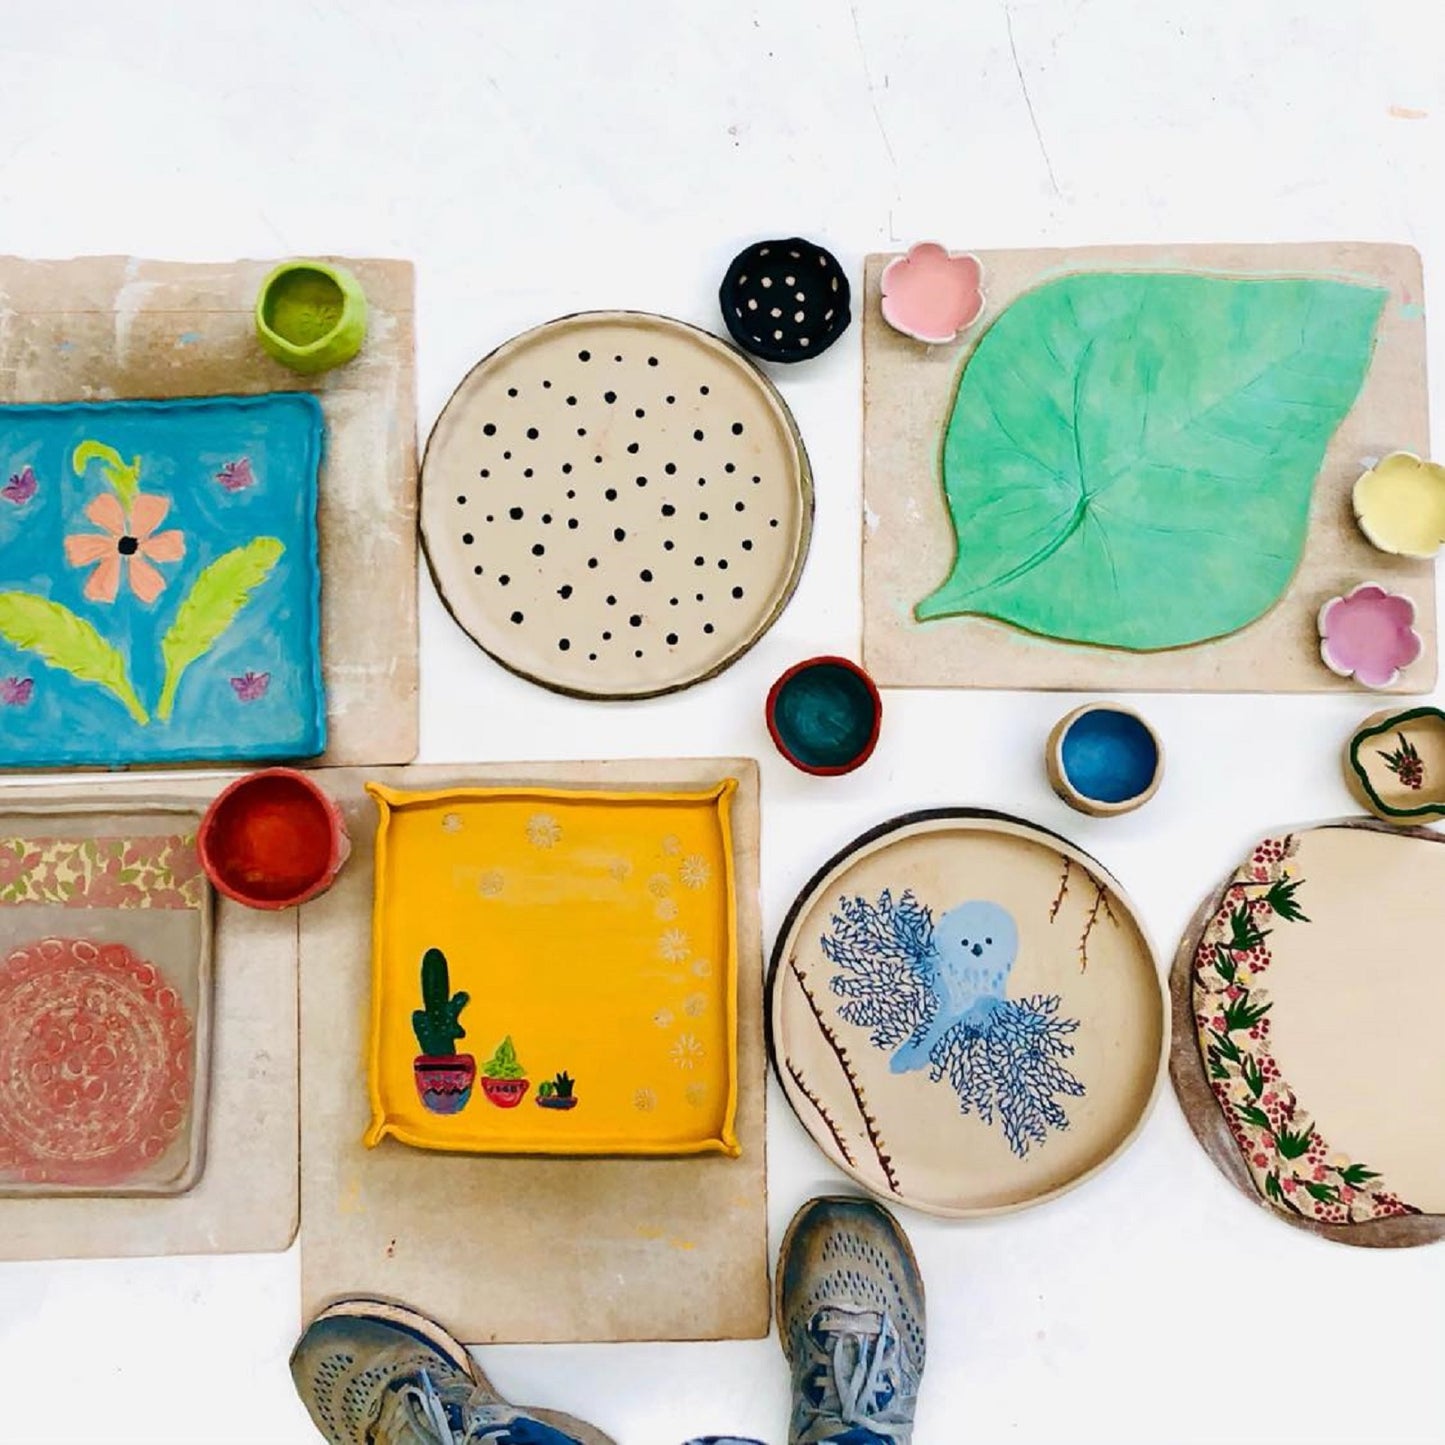 Create you own hand built Pottery Platter and Dip Bowl -  Sunday 3rd March 10am -12